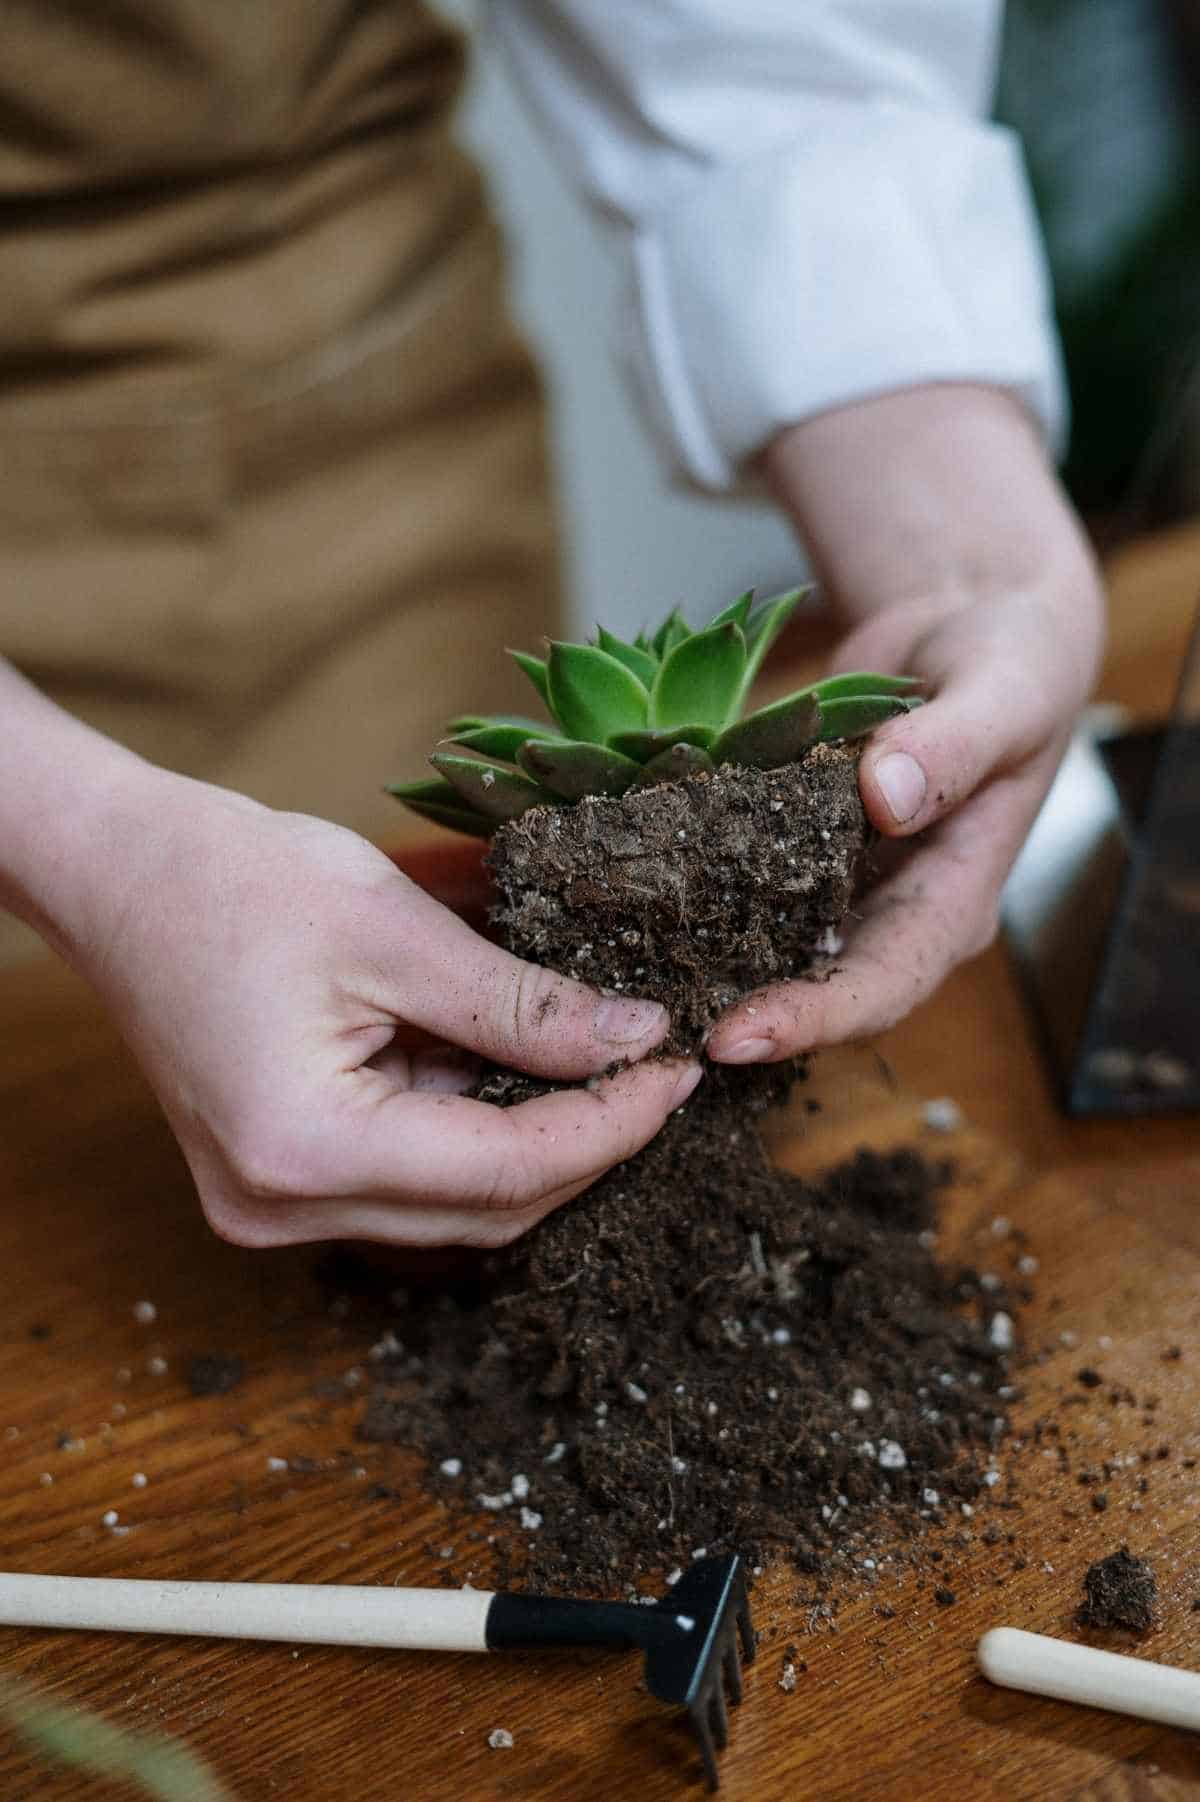 Hands brush old soil away from the roots of a succulent